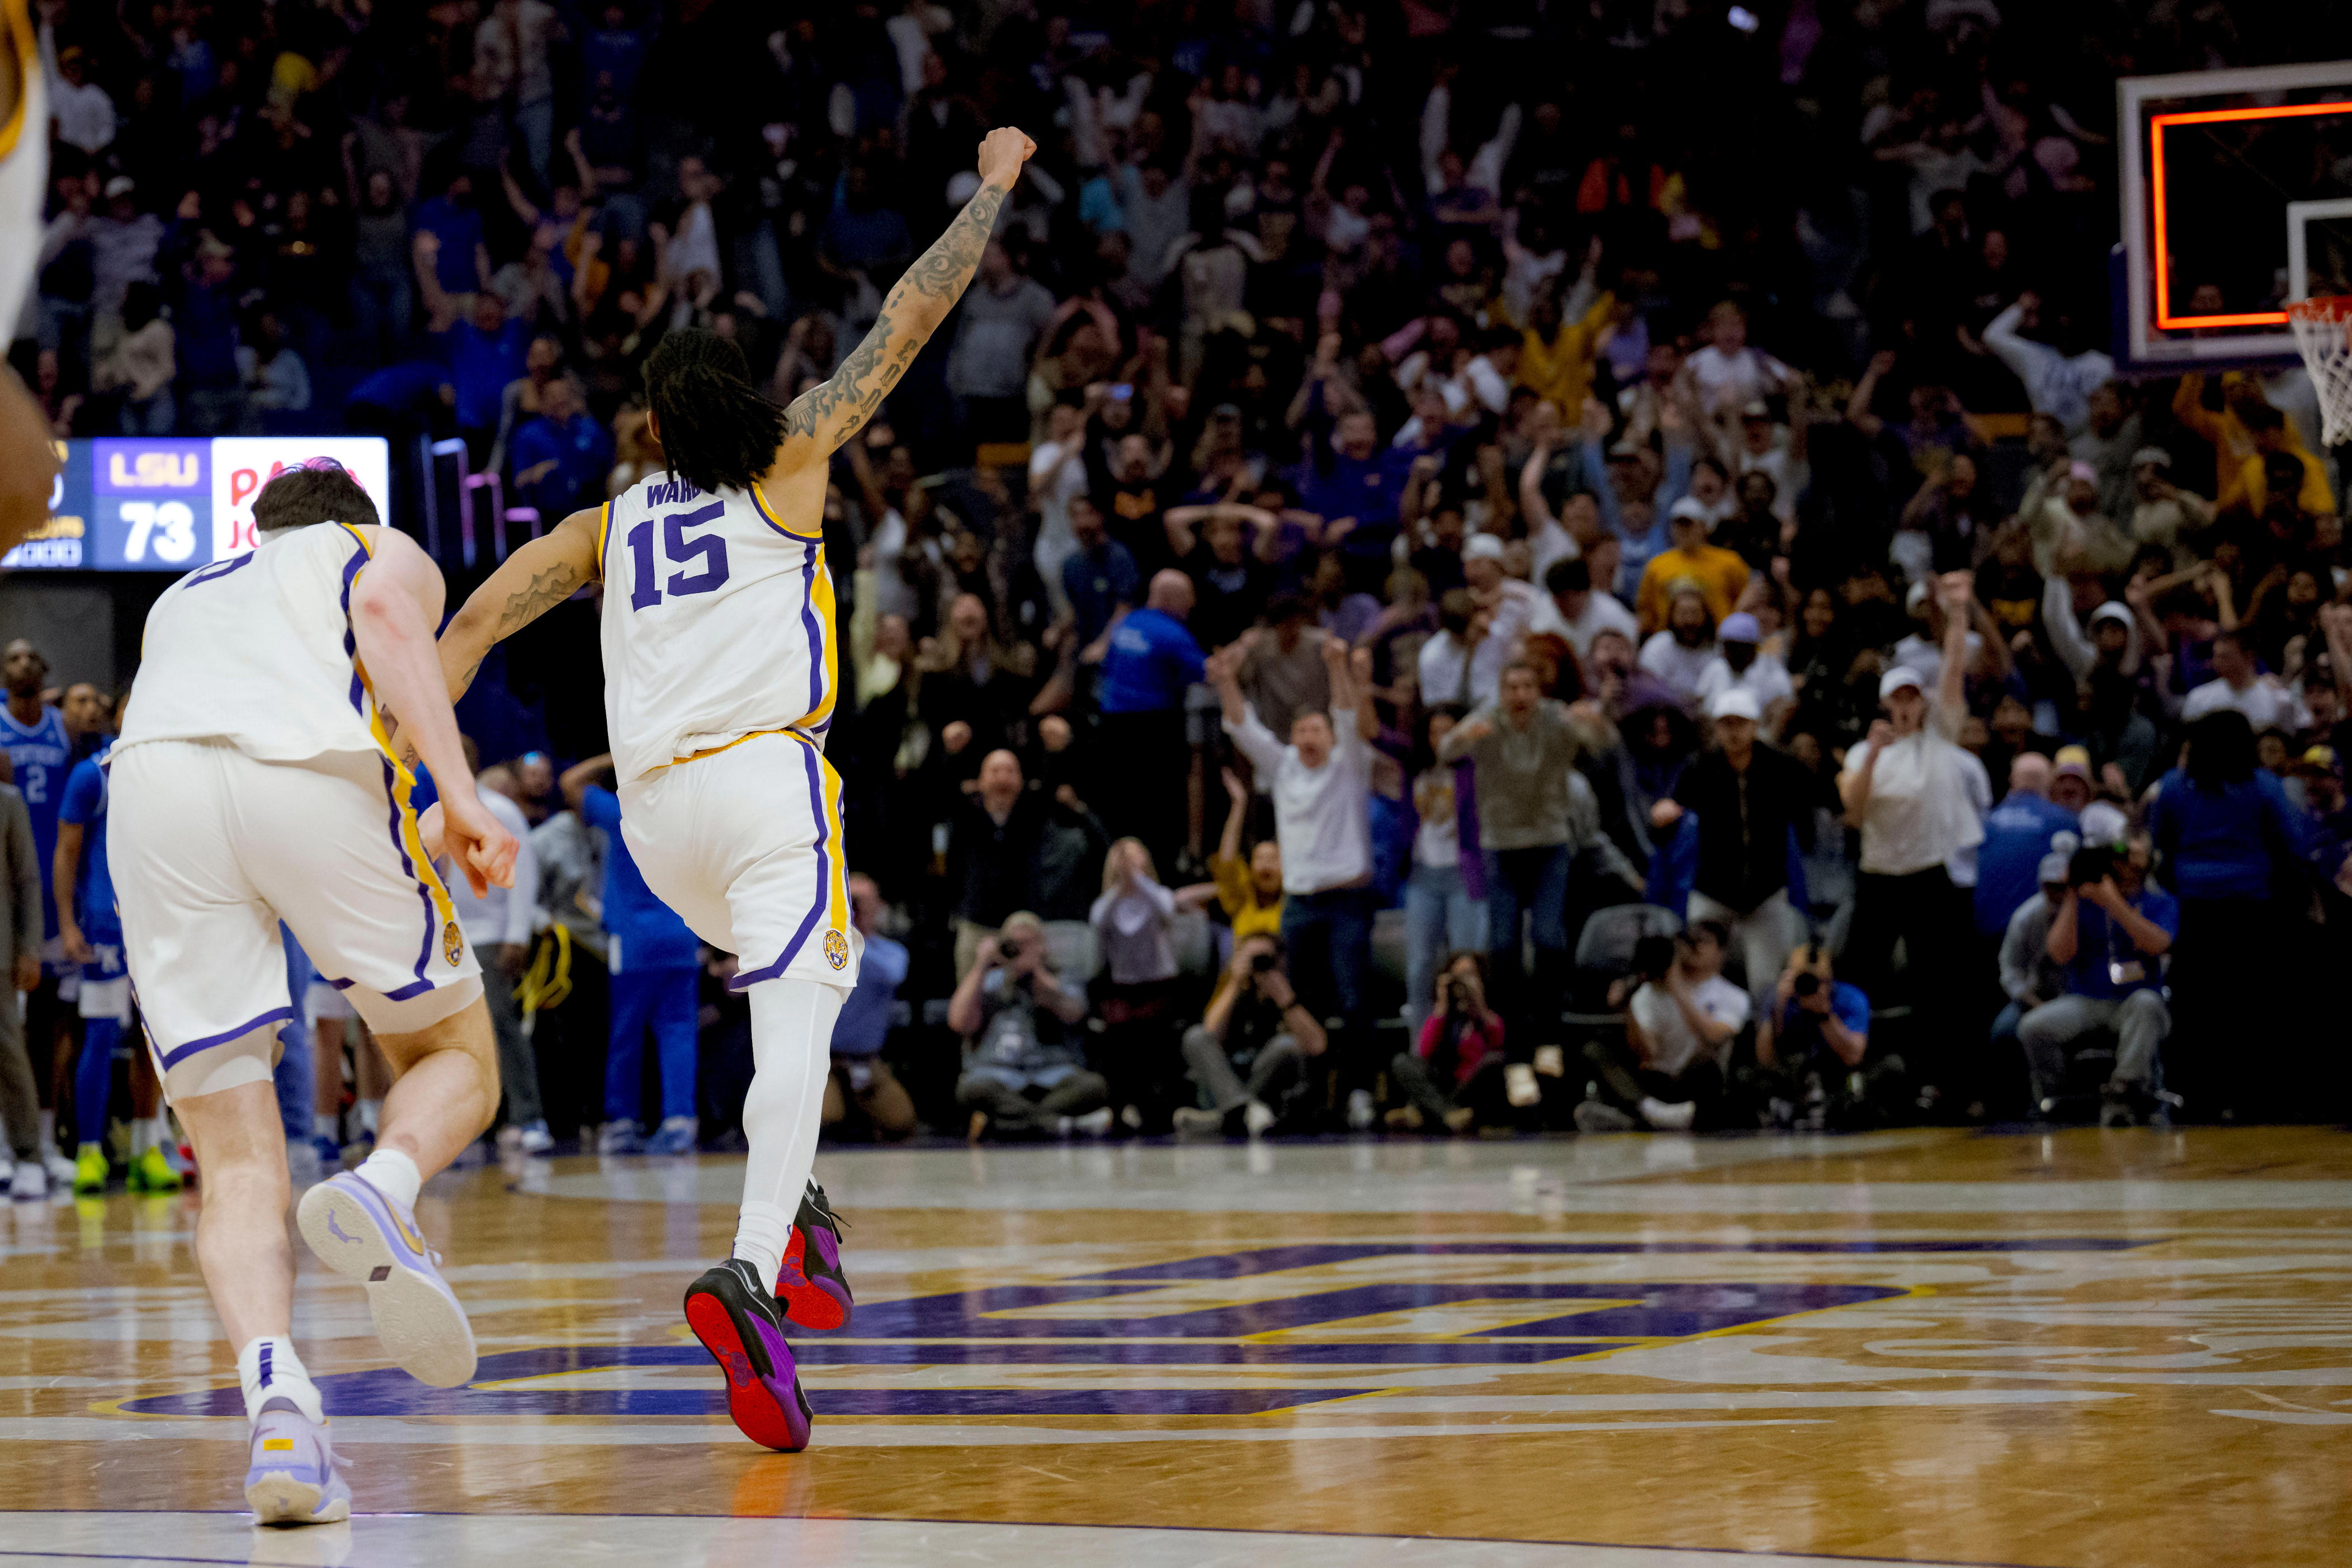 lsu’s game-winning buzzer-beater against kentucky is one of the coldest shots we’ve seen this season